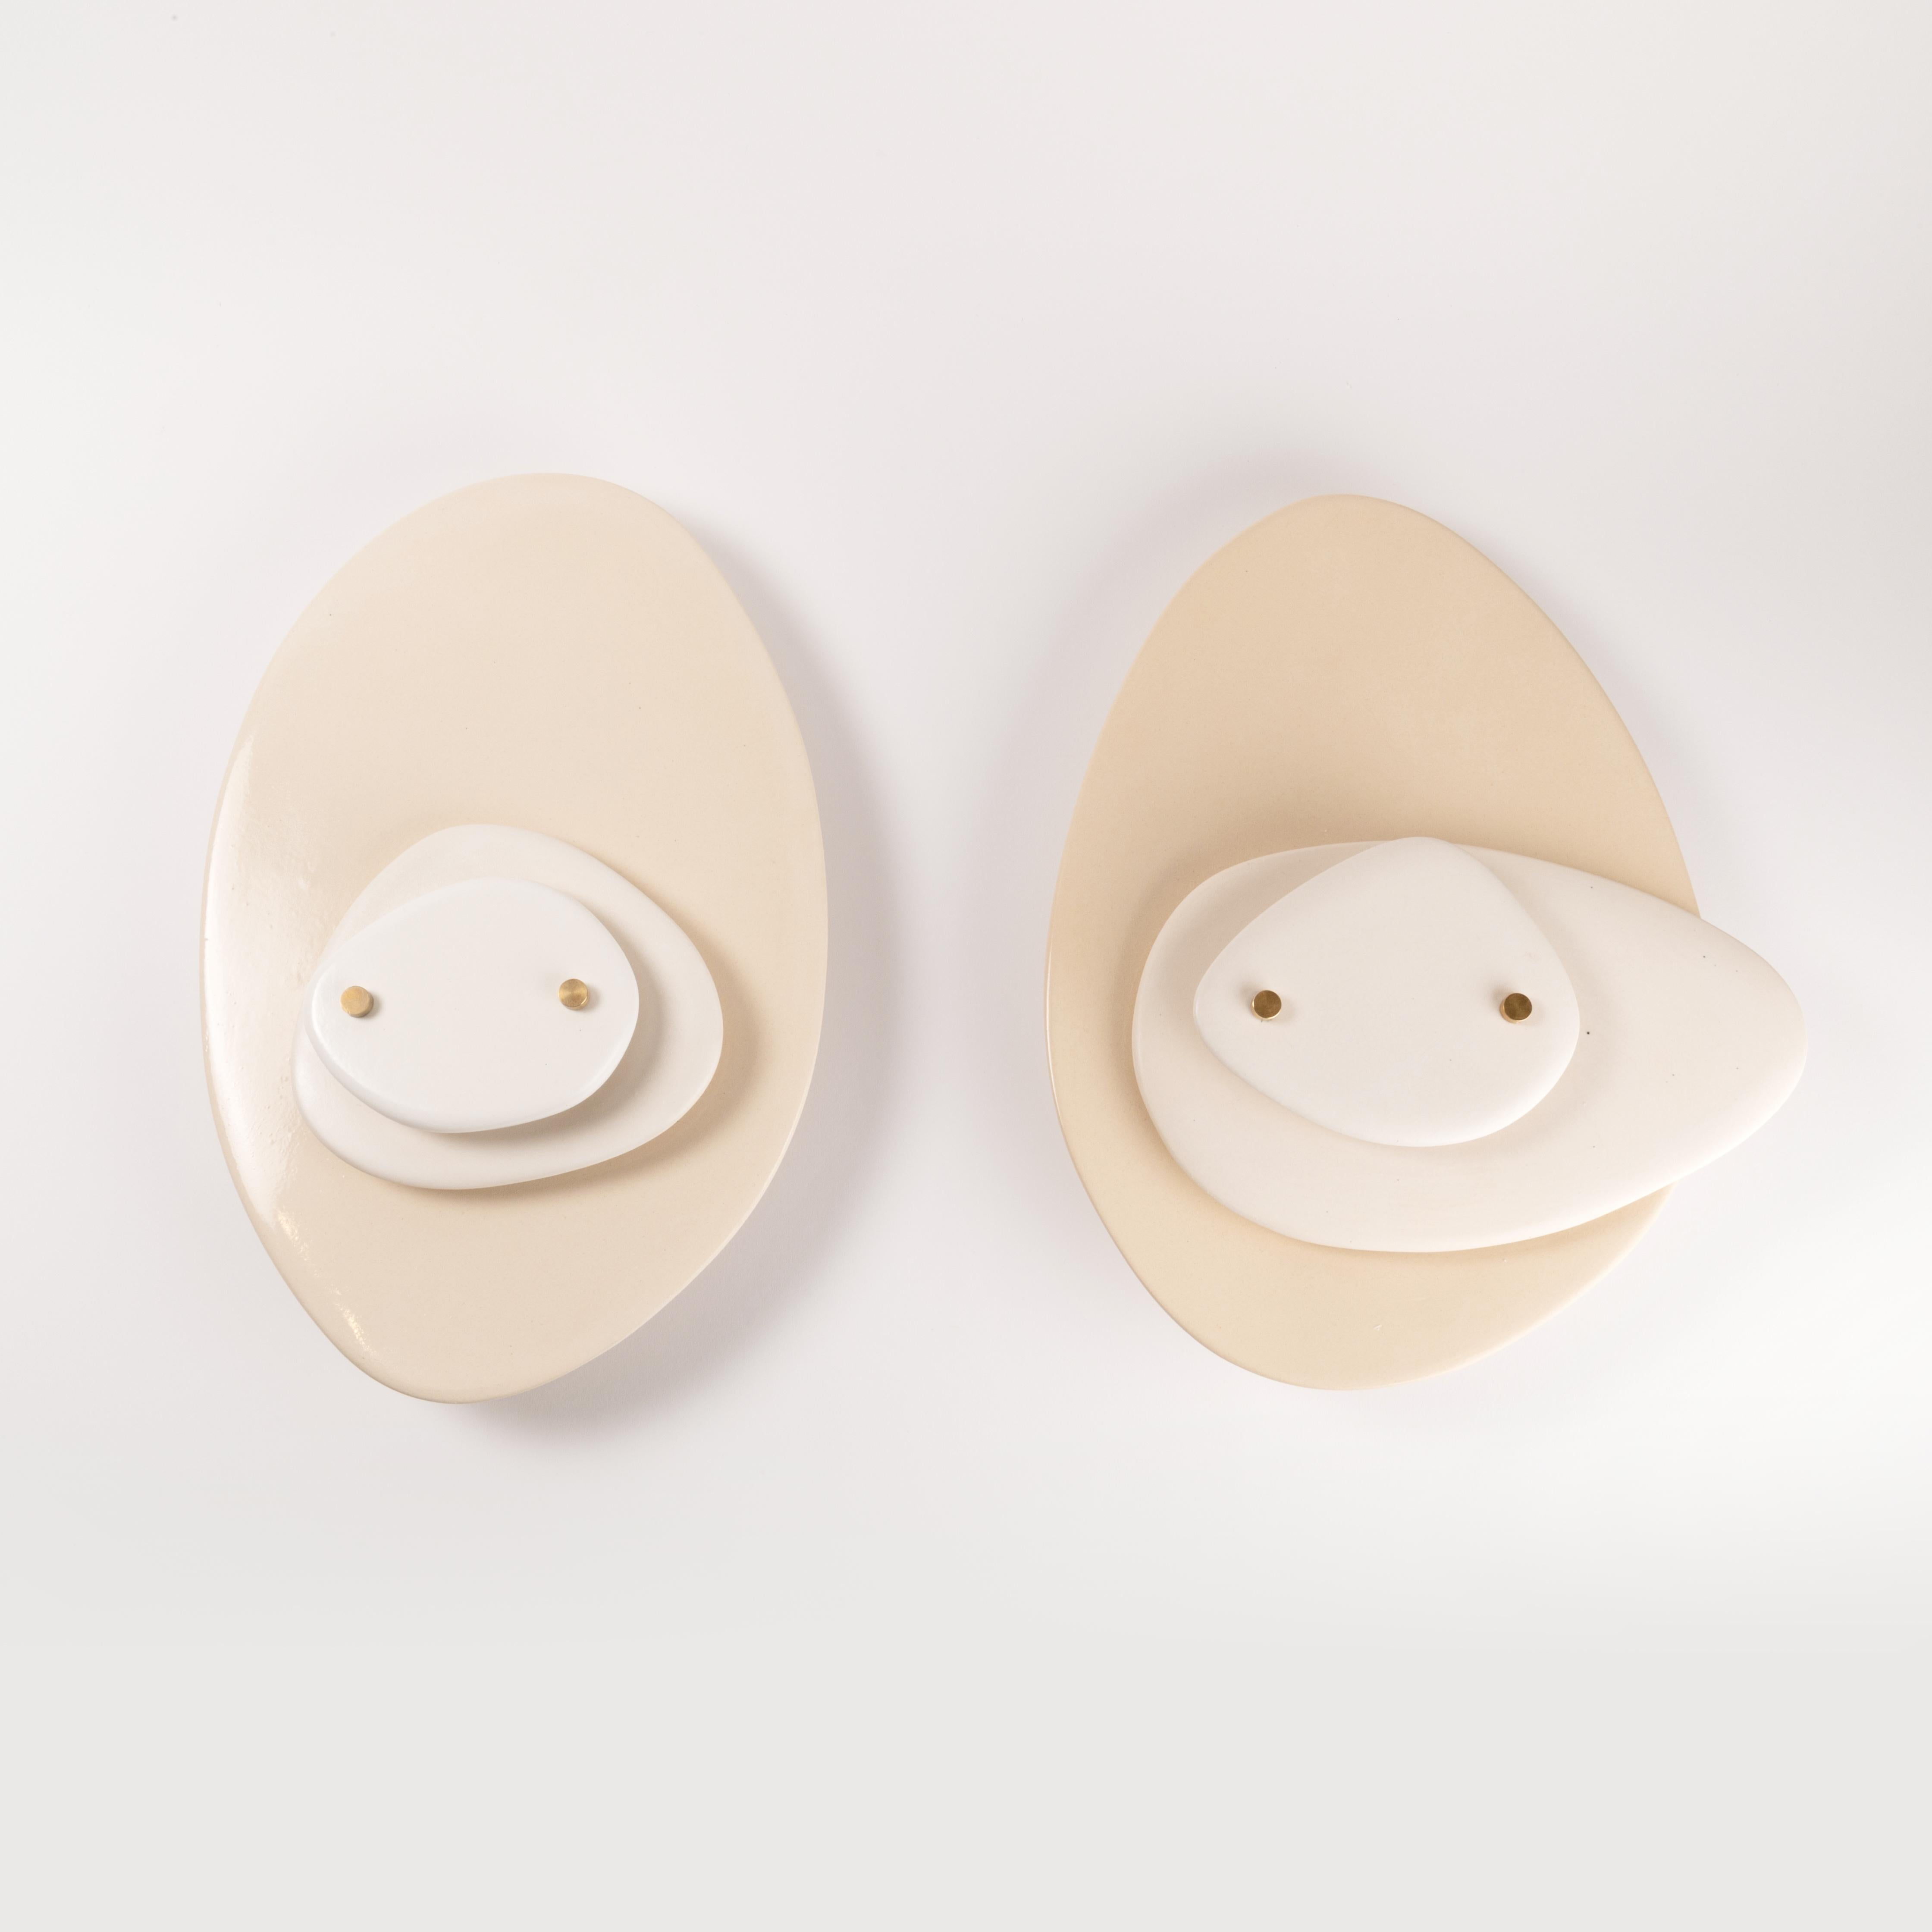 Set of 2 Nerites wall sconces by Elsa Foulon
Dimensions: D 34 x H 25 cm 
Materials: Ceramic, brass
Unique Piece

All our lamps can be wired according to each country. If sold to the USA it will be wired for the USA for instance.

Elsa Foulon, before